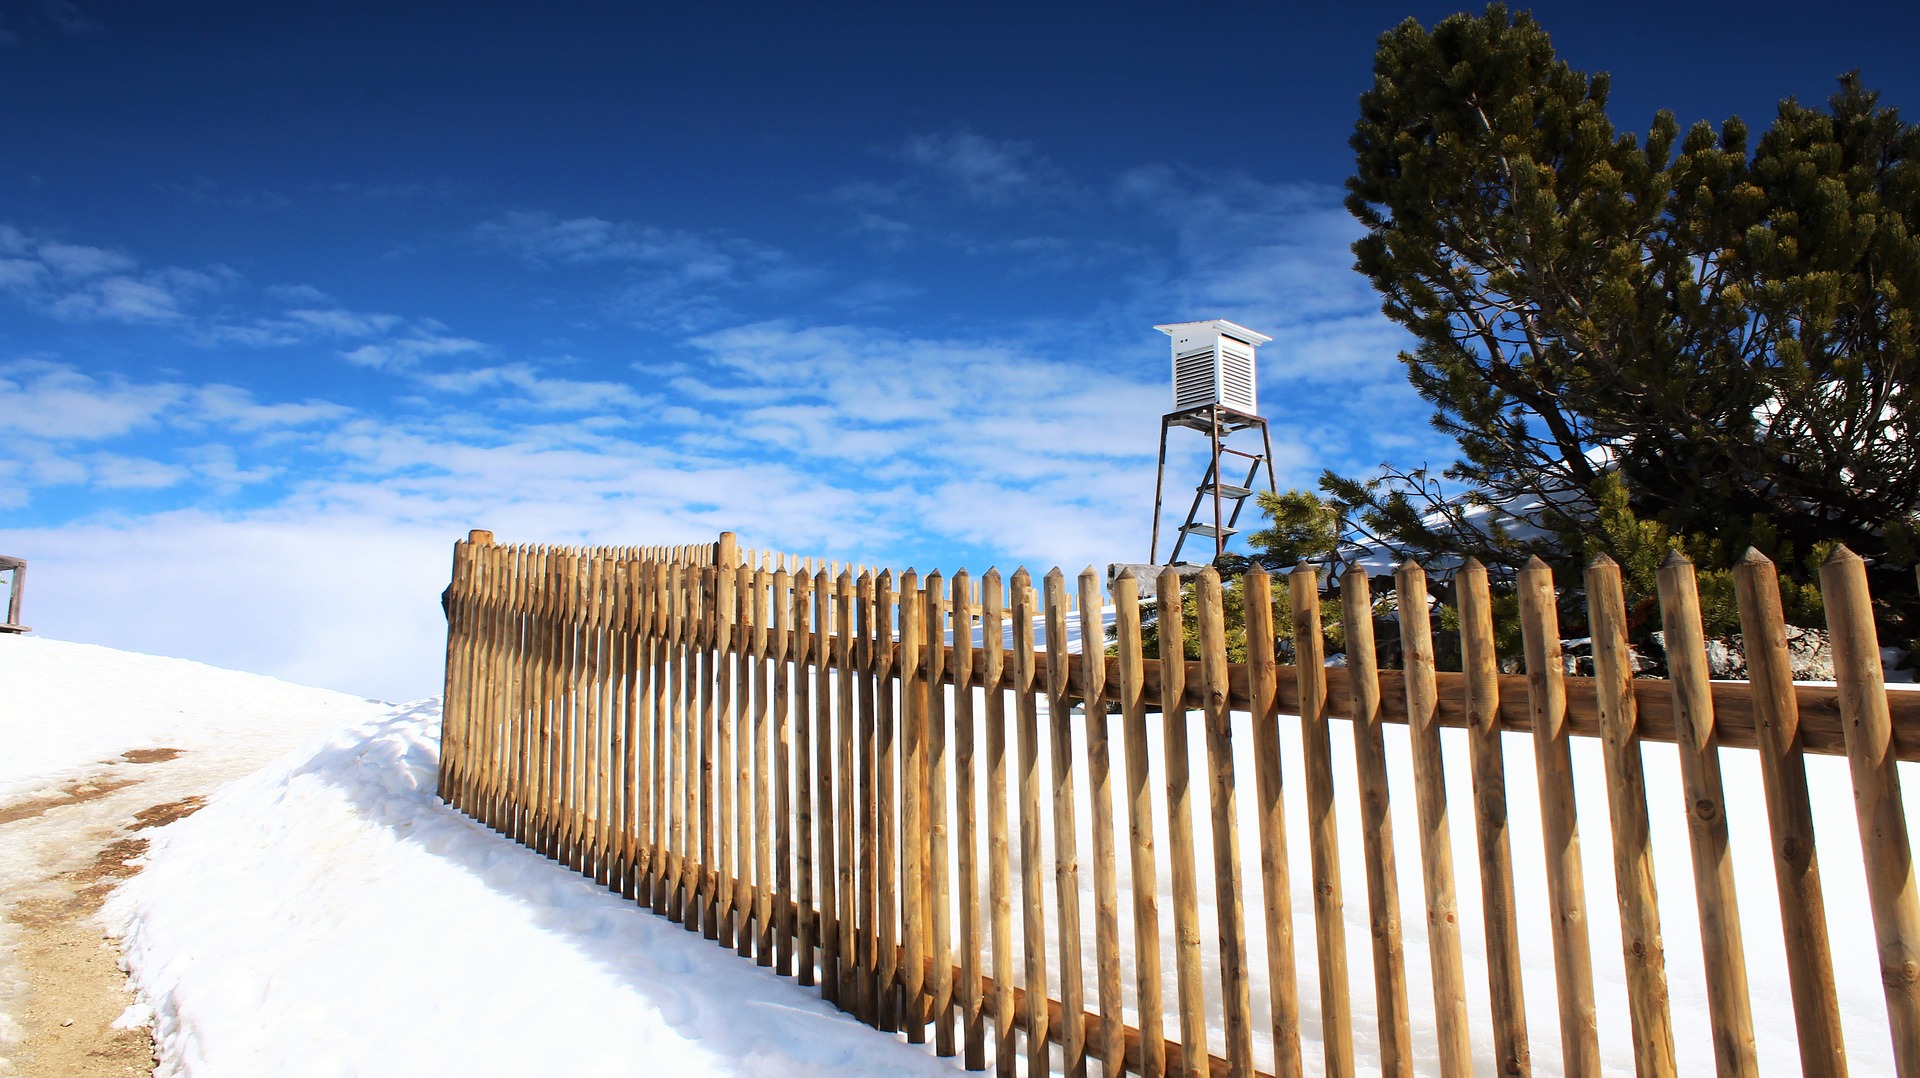 Wallpaper Wooden fence, snow, mountains